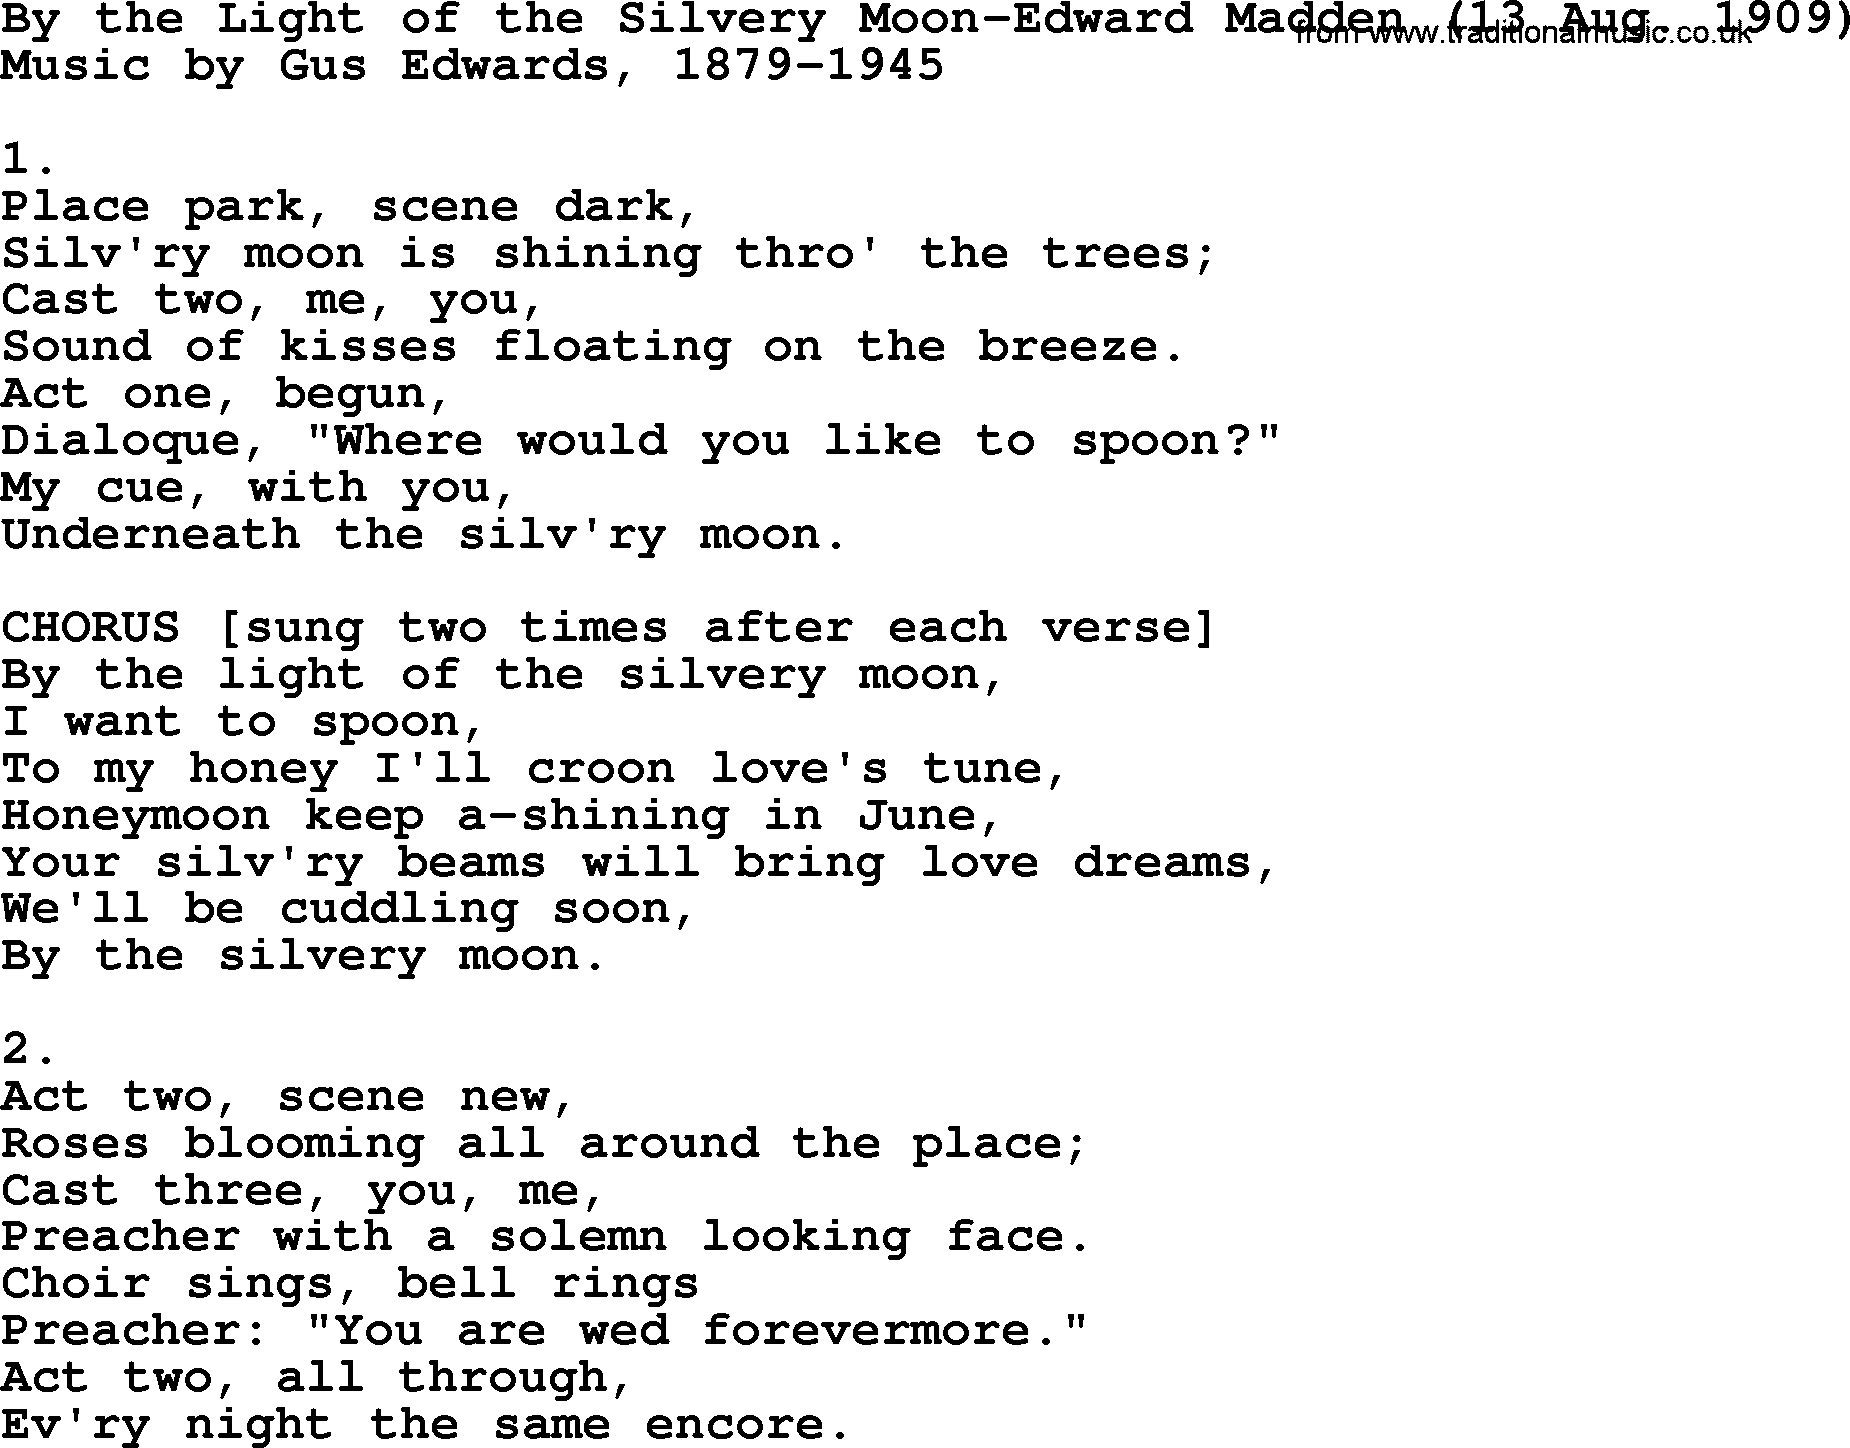 World War(WW1) One Song: By The Light Of The Silvery Moon-Edward Madden 13 Aug 1909, lyrics and PDF